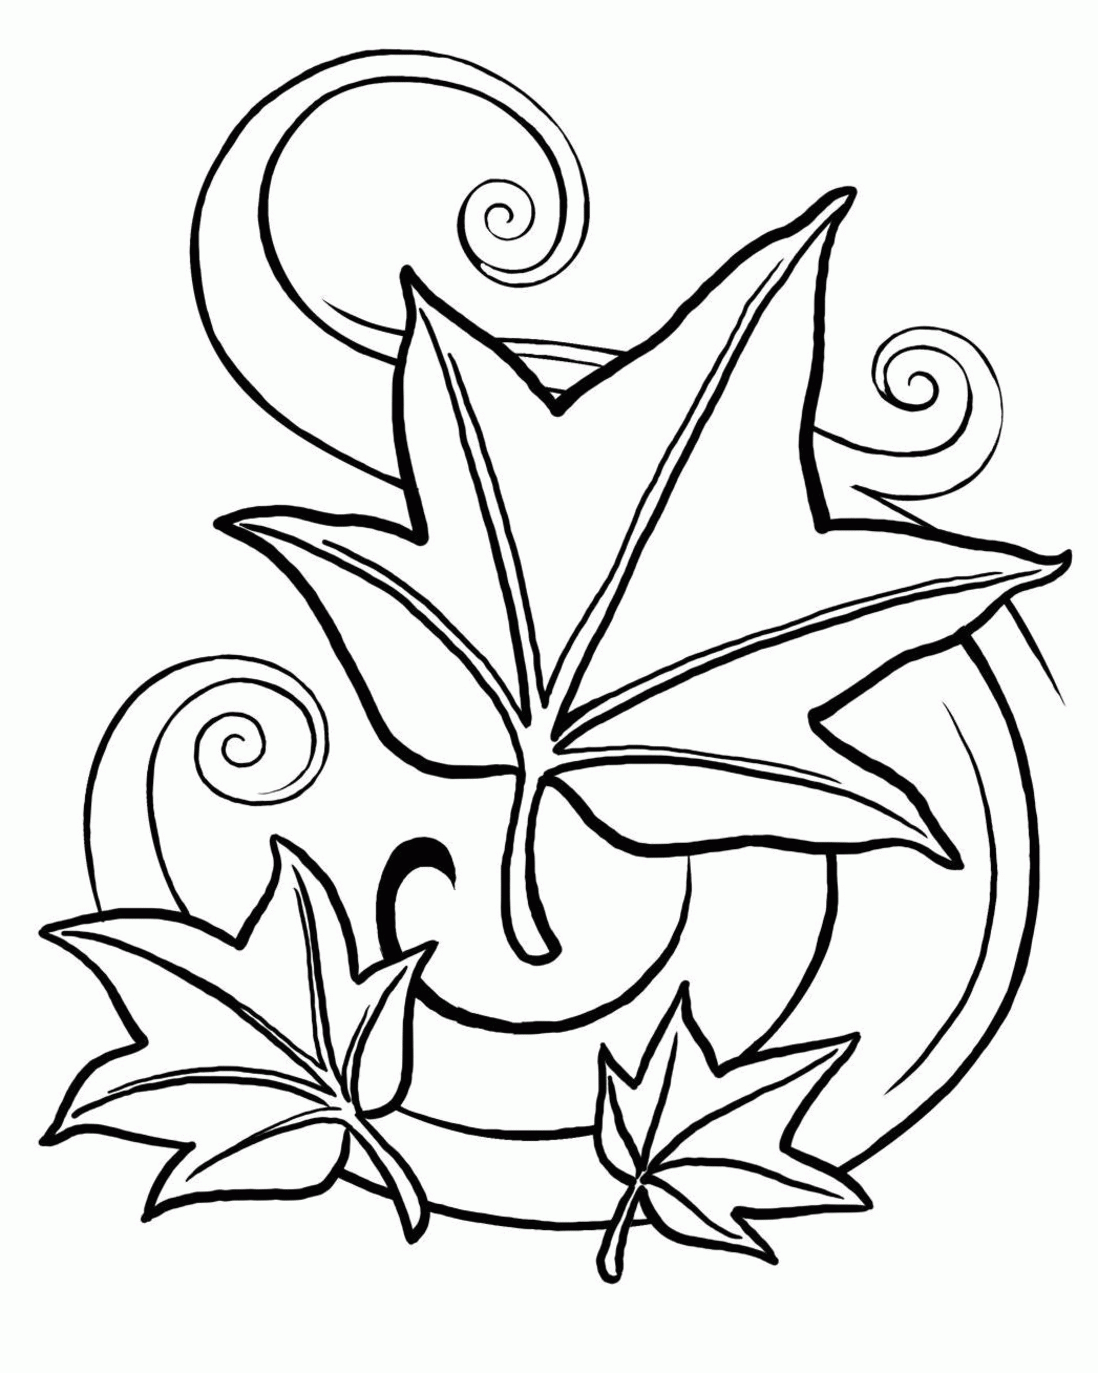 Simple Coloring Pages For Fall - Coloring Home